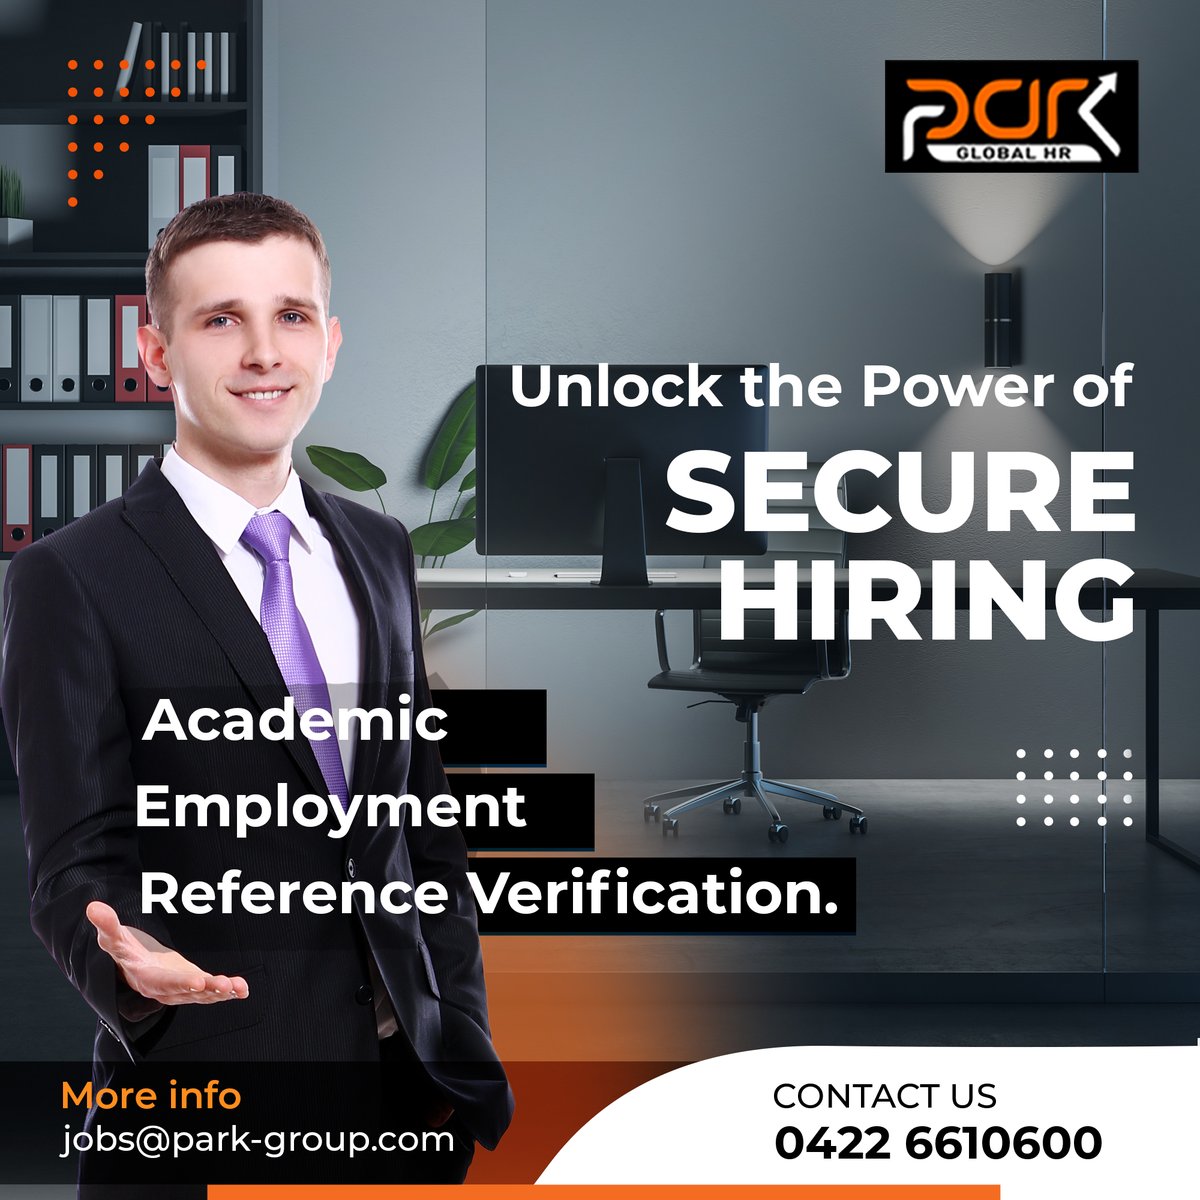 Looking to build a team of unstoppable talent? Make the smart move with our Academic, Employment, and Reference Verification services. 

Trust, but verify! Your dream team is just a verification away. 

#HiringSmart #SecureHiring #BackgroundCheck #VerifyCredentials #Recruitment